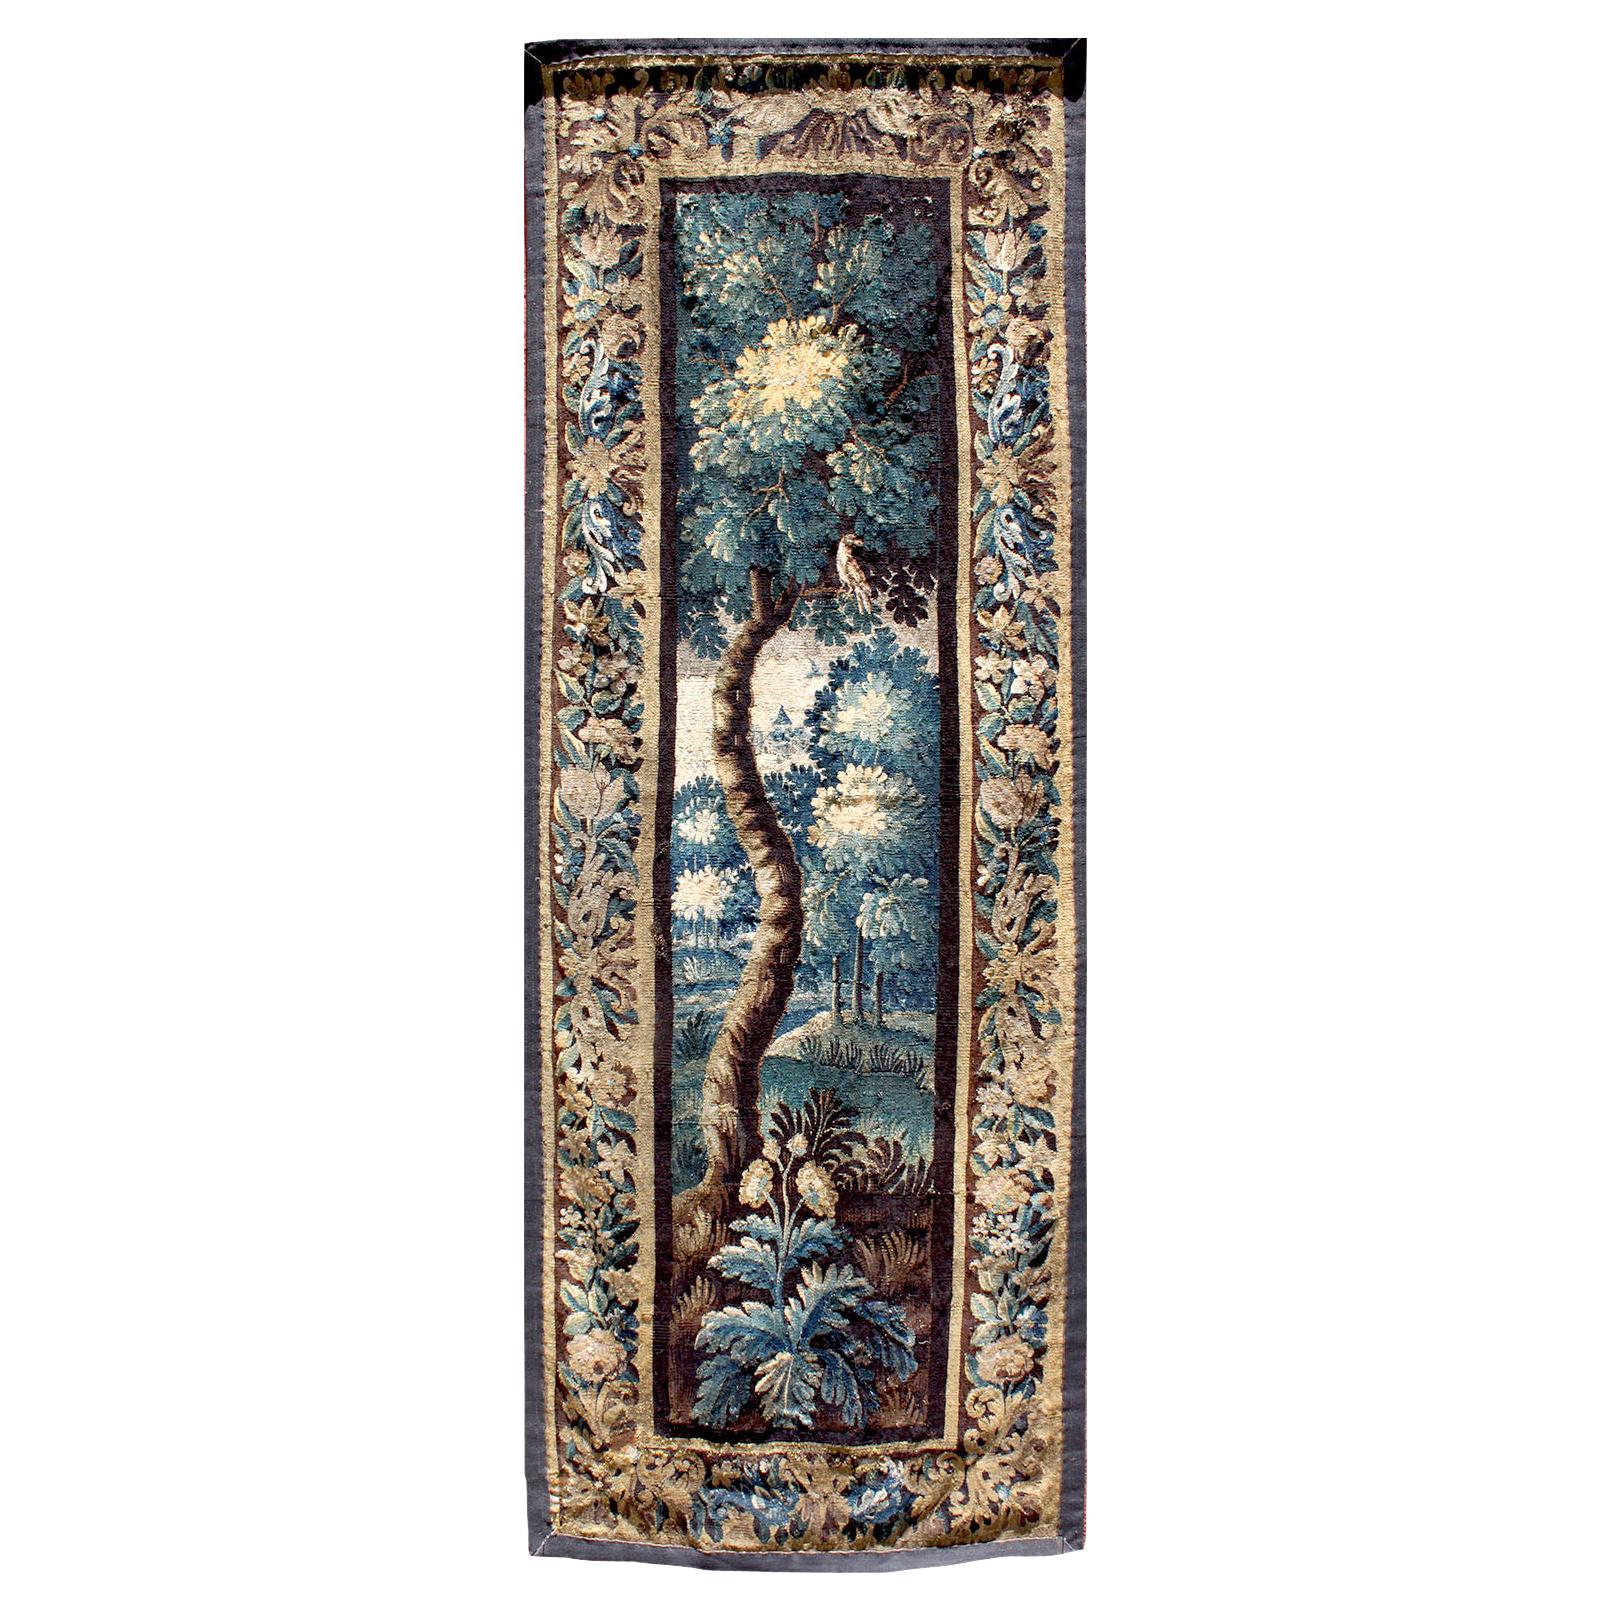 Flemish 18th-19th Century Verdure Landscape Tapestry Panel Centered with a Tree